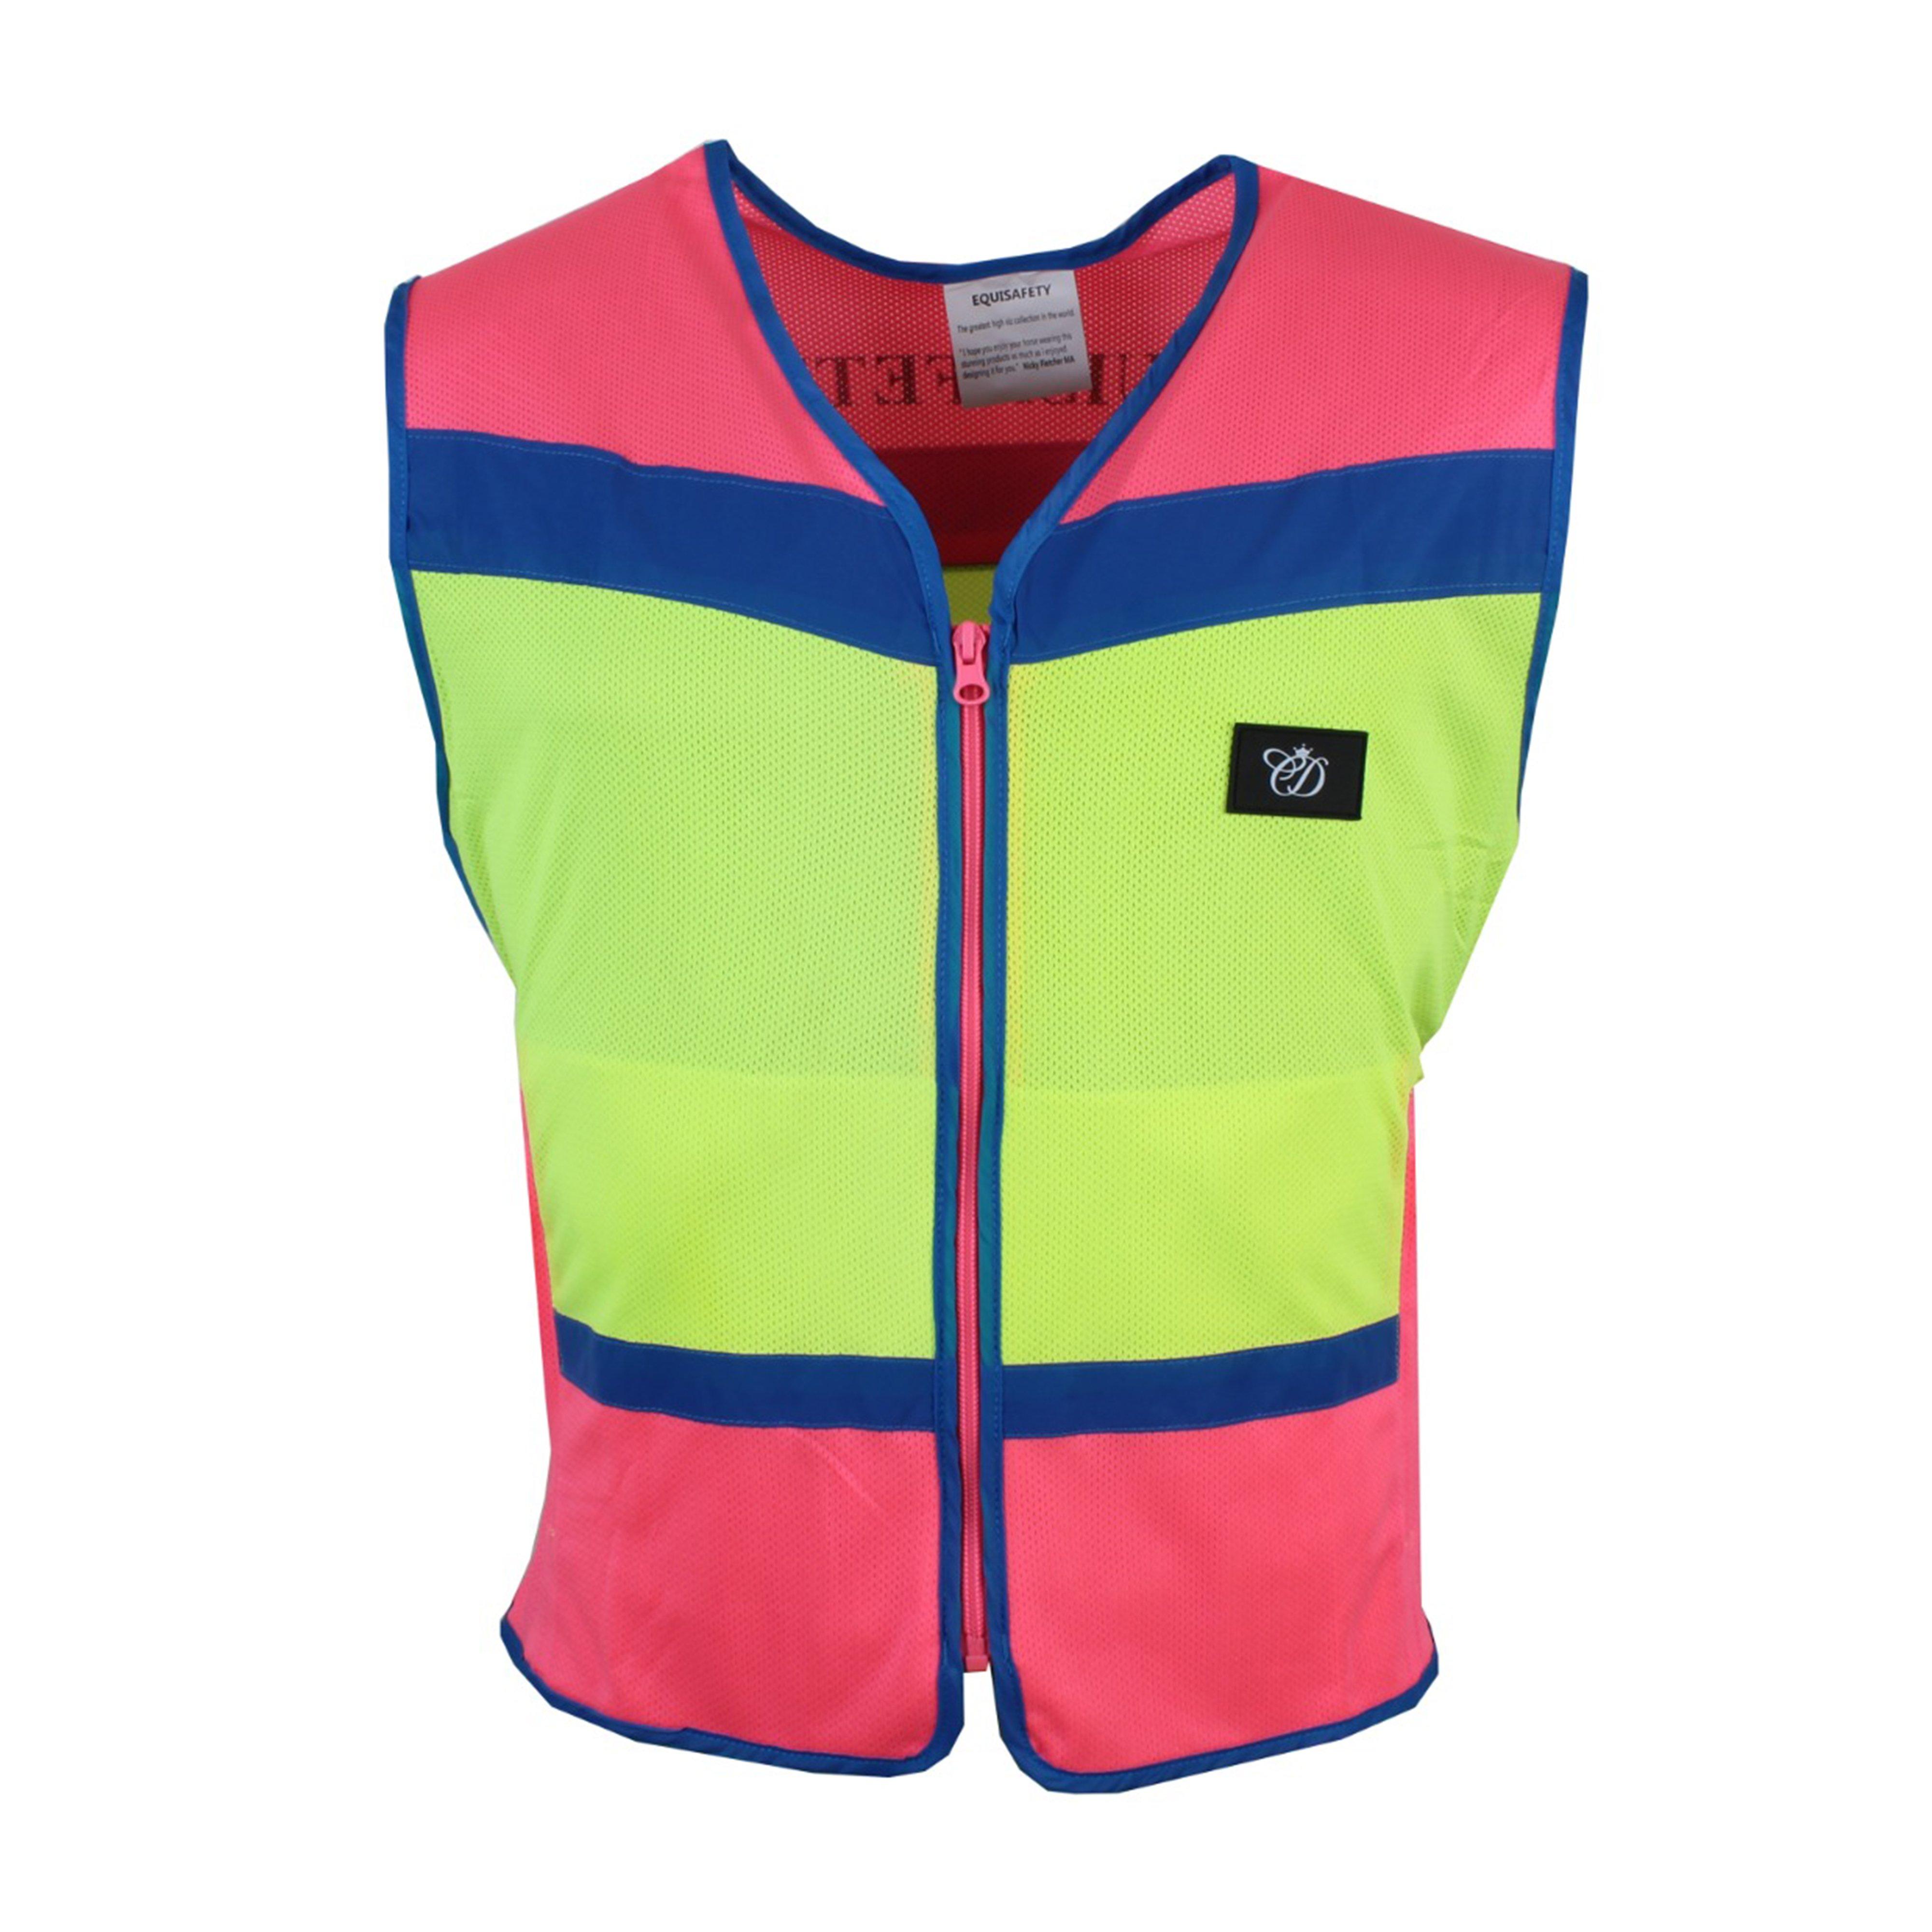  Equisafety Charlotte Dujardin Multi-Coloured Waistcoat Pink/Yellow, Pink